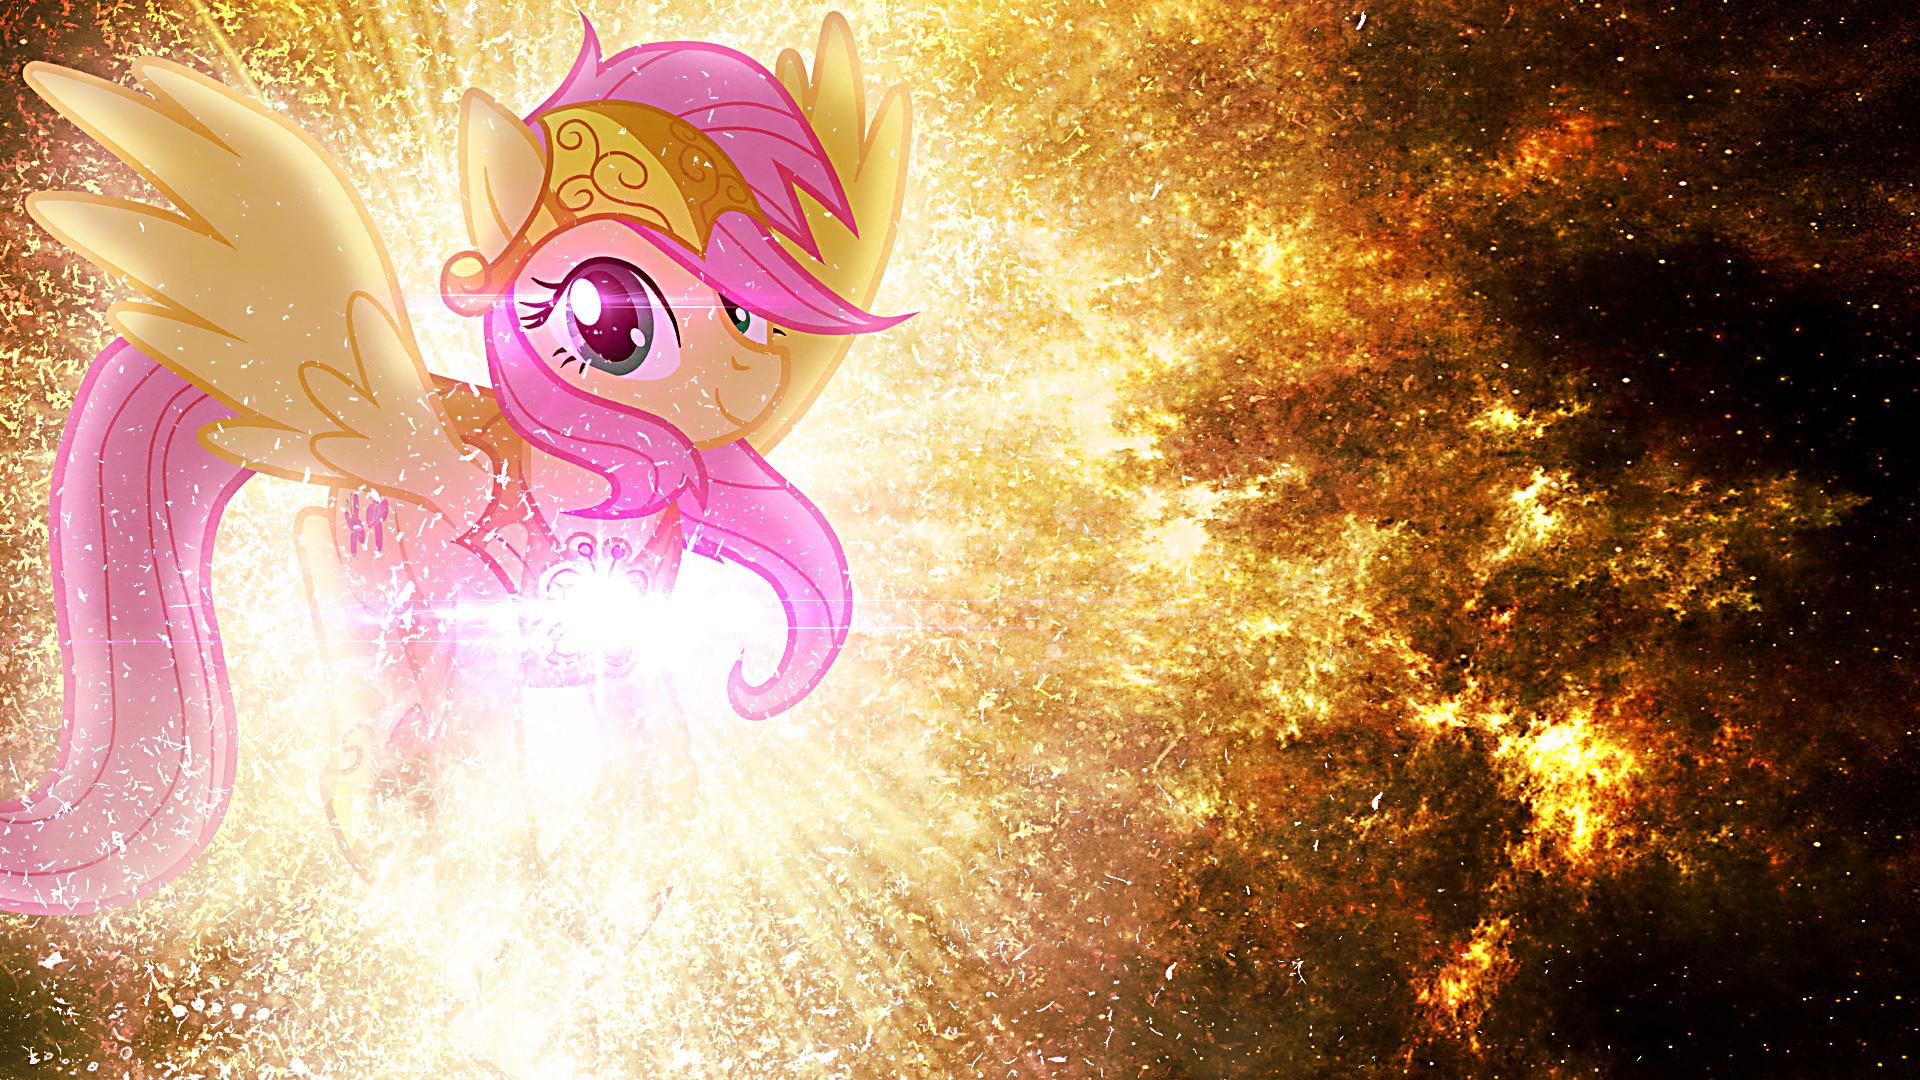 Fluttershy Guardian Of Kindness - Wallpaper by Equestria-Prevails, JennieOo and Tzolkine